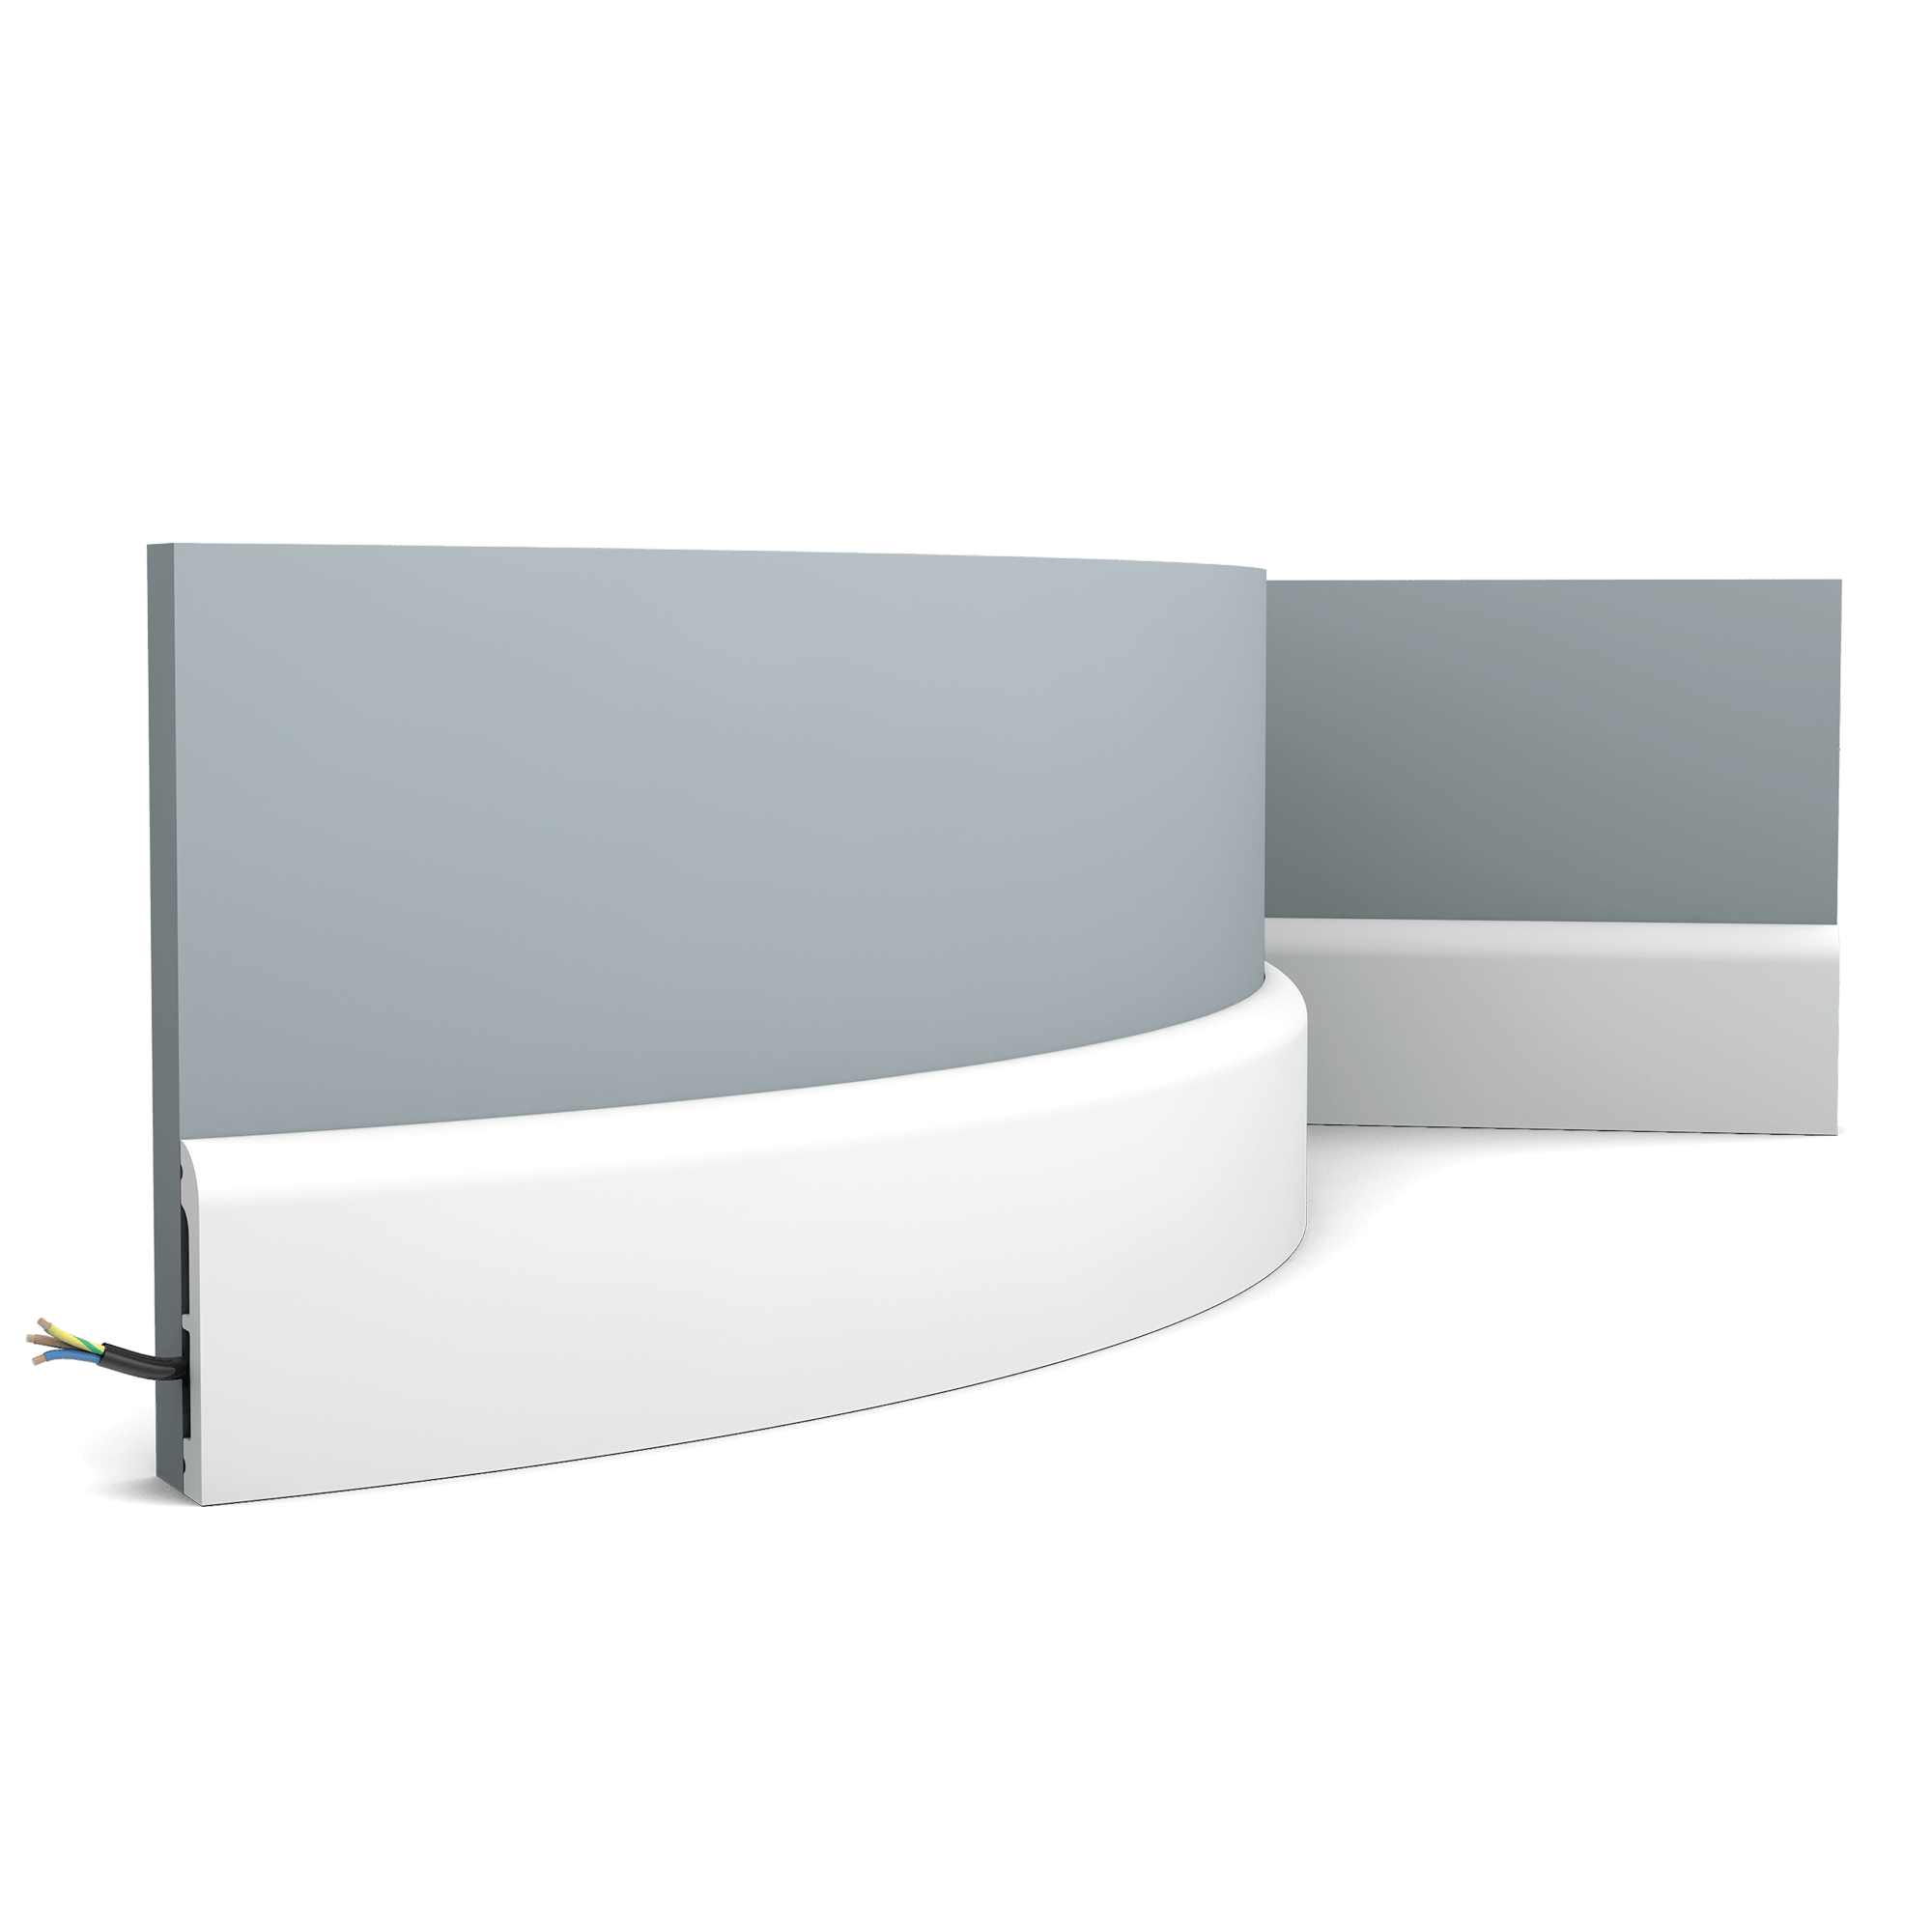 Flexible version of the SX183. This multifunctional skirting board with rounded top provides endless possibilities. Thanks to its Flex technology, curved walls and surfaces are no problem. Installation remark: It is necessary to screw this profile on the wall. Flex Radius: R min = 40 cm